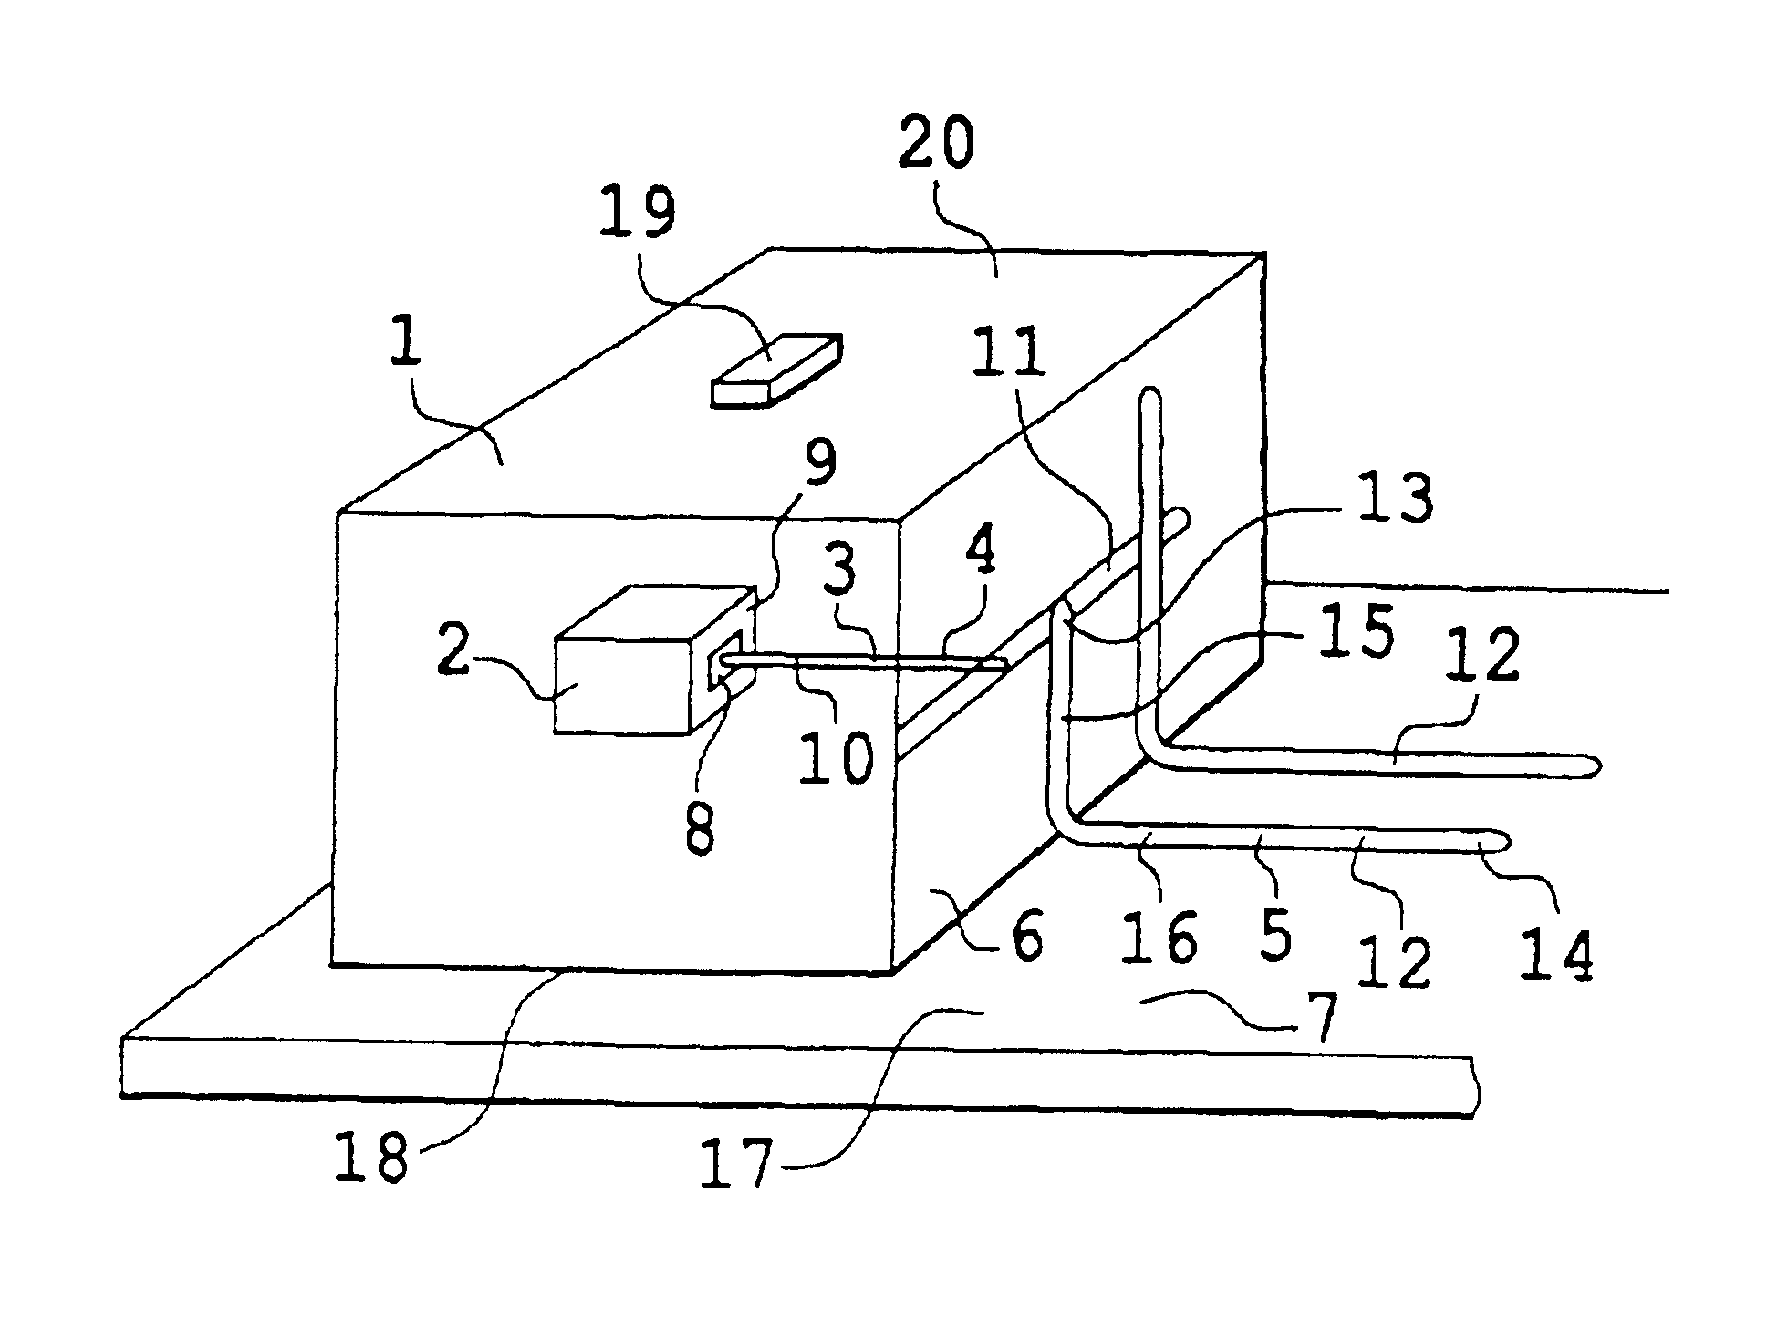 Electronic assembly having high interconnection density